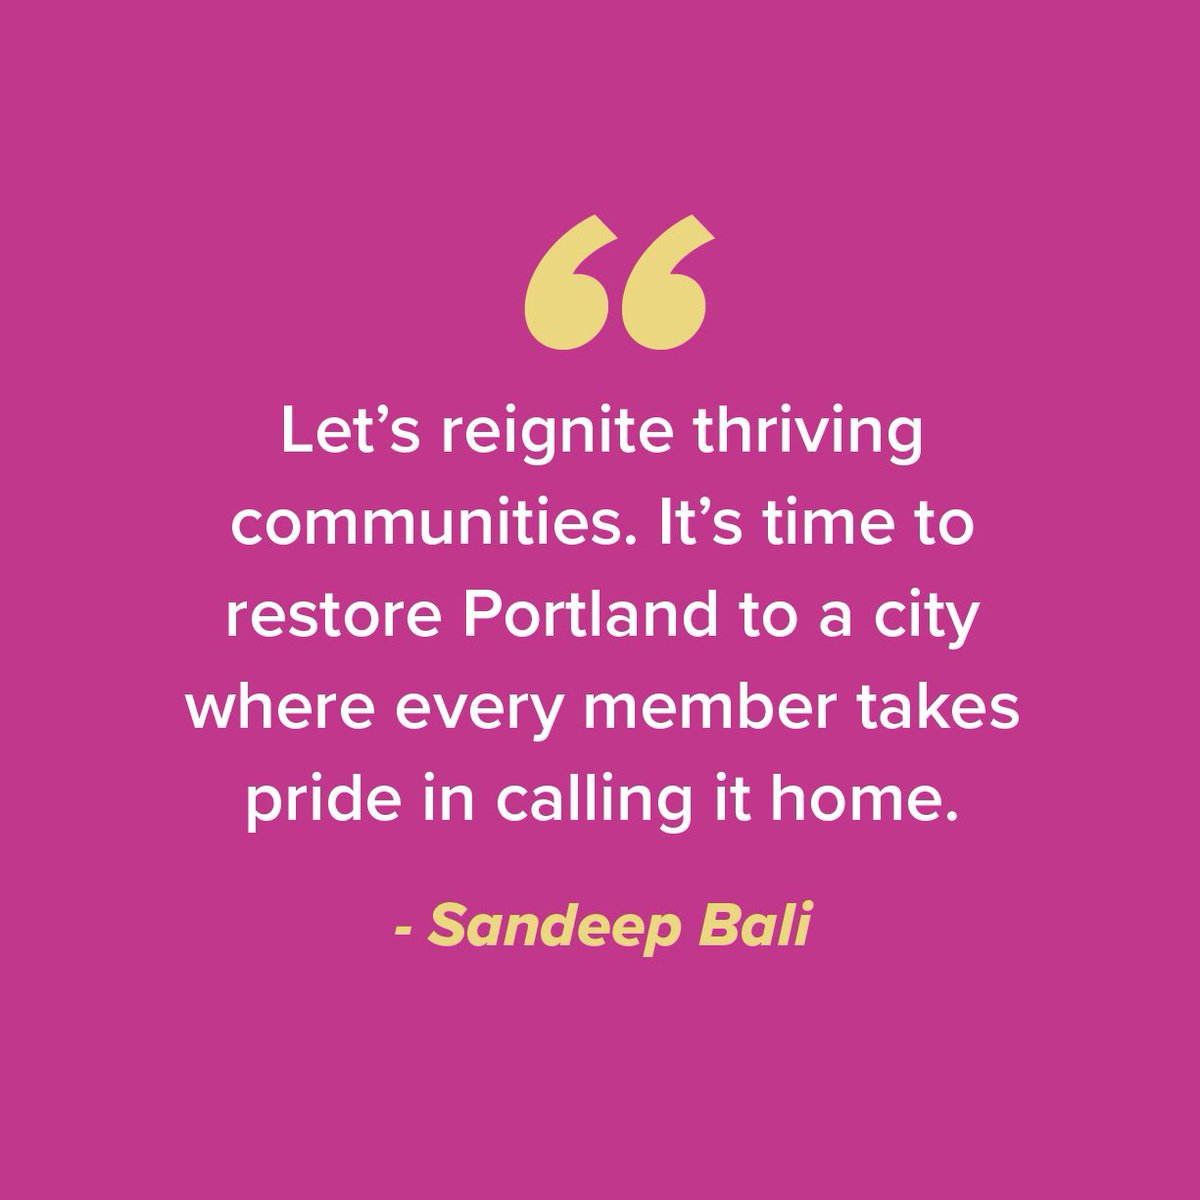 🌟 Help revive Portland’s promise and donate to my campaign now! Join us in creating a city where public safety is paramount, parks and public spaces are preserved, and affordable housing is accessible to all income levels. Let’s end urban camping and open drug use. Your